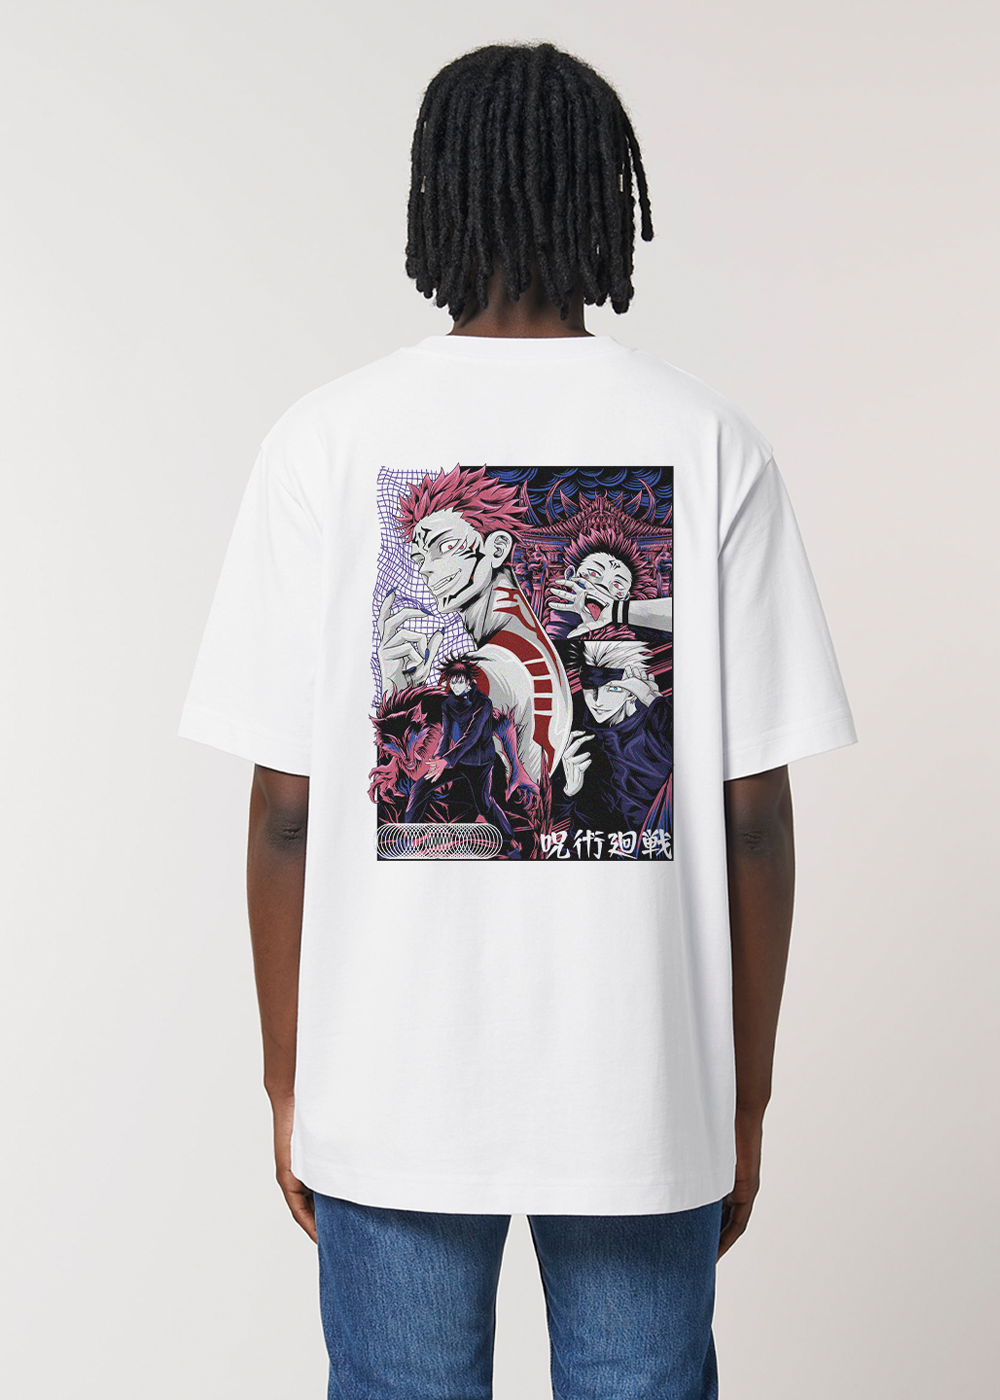 MADE IN JAPAN - CURSED ENERGY® WHITE T-SHIRT